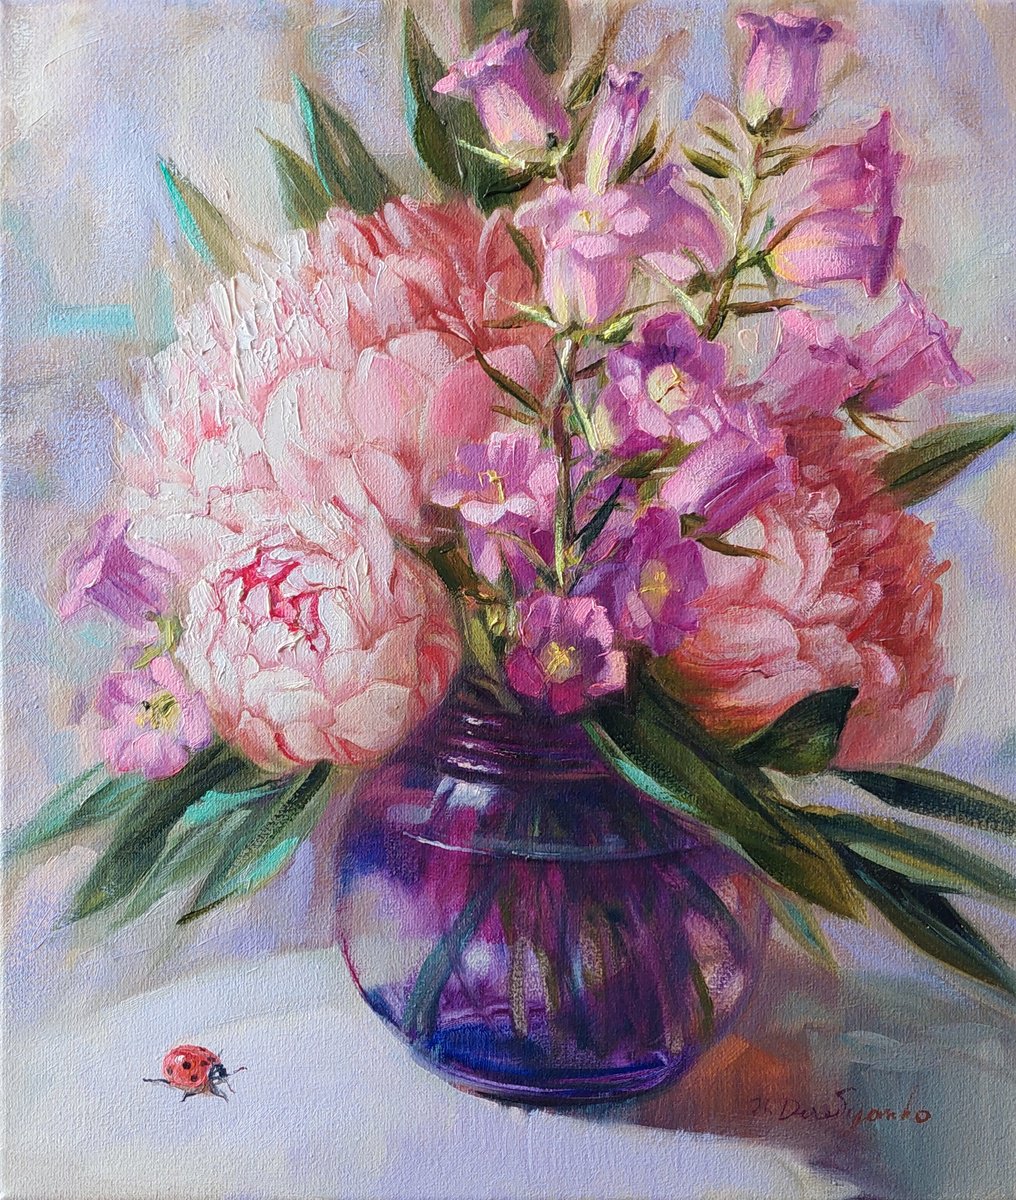 Peony oil painting original canvas art, Pink flowers in glass painting 12x14 inch, Lady bu... by Nataly Derevyanko